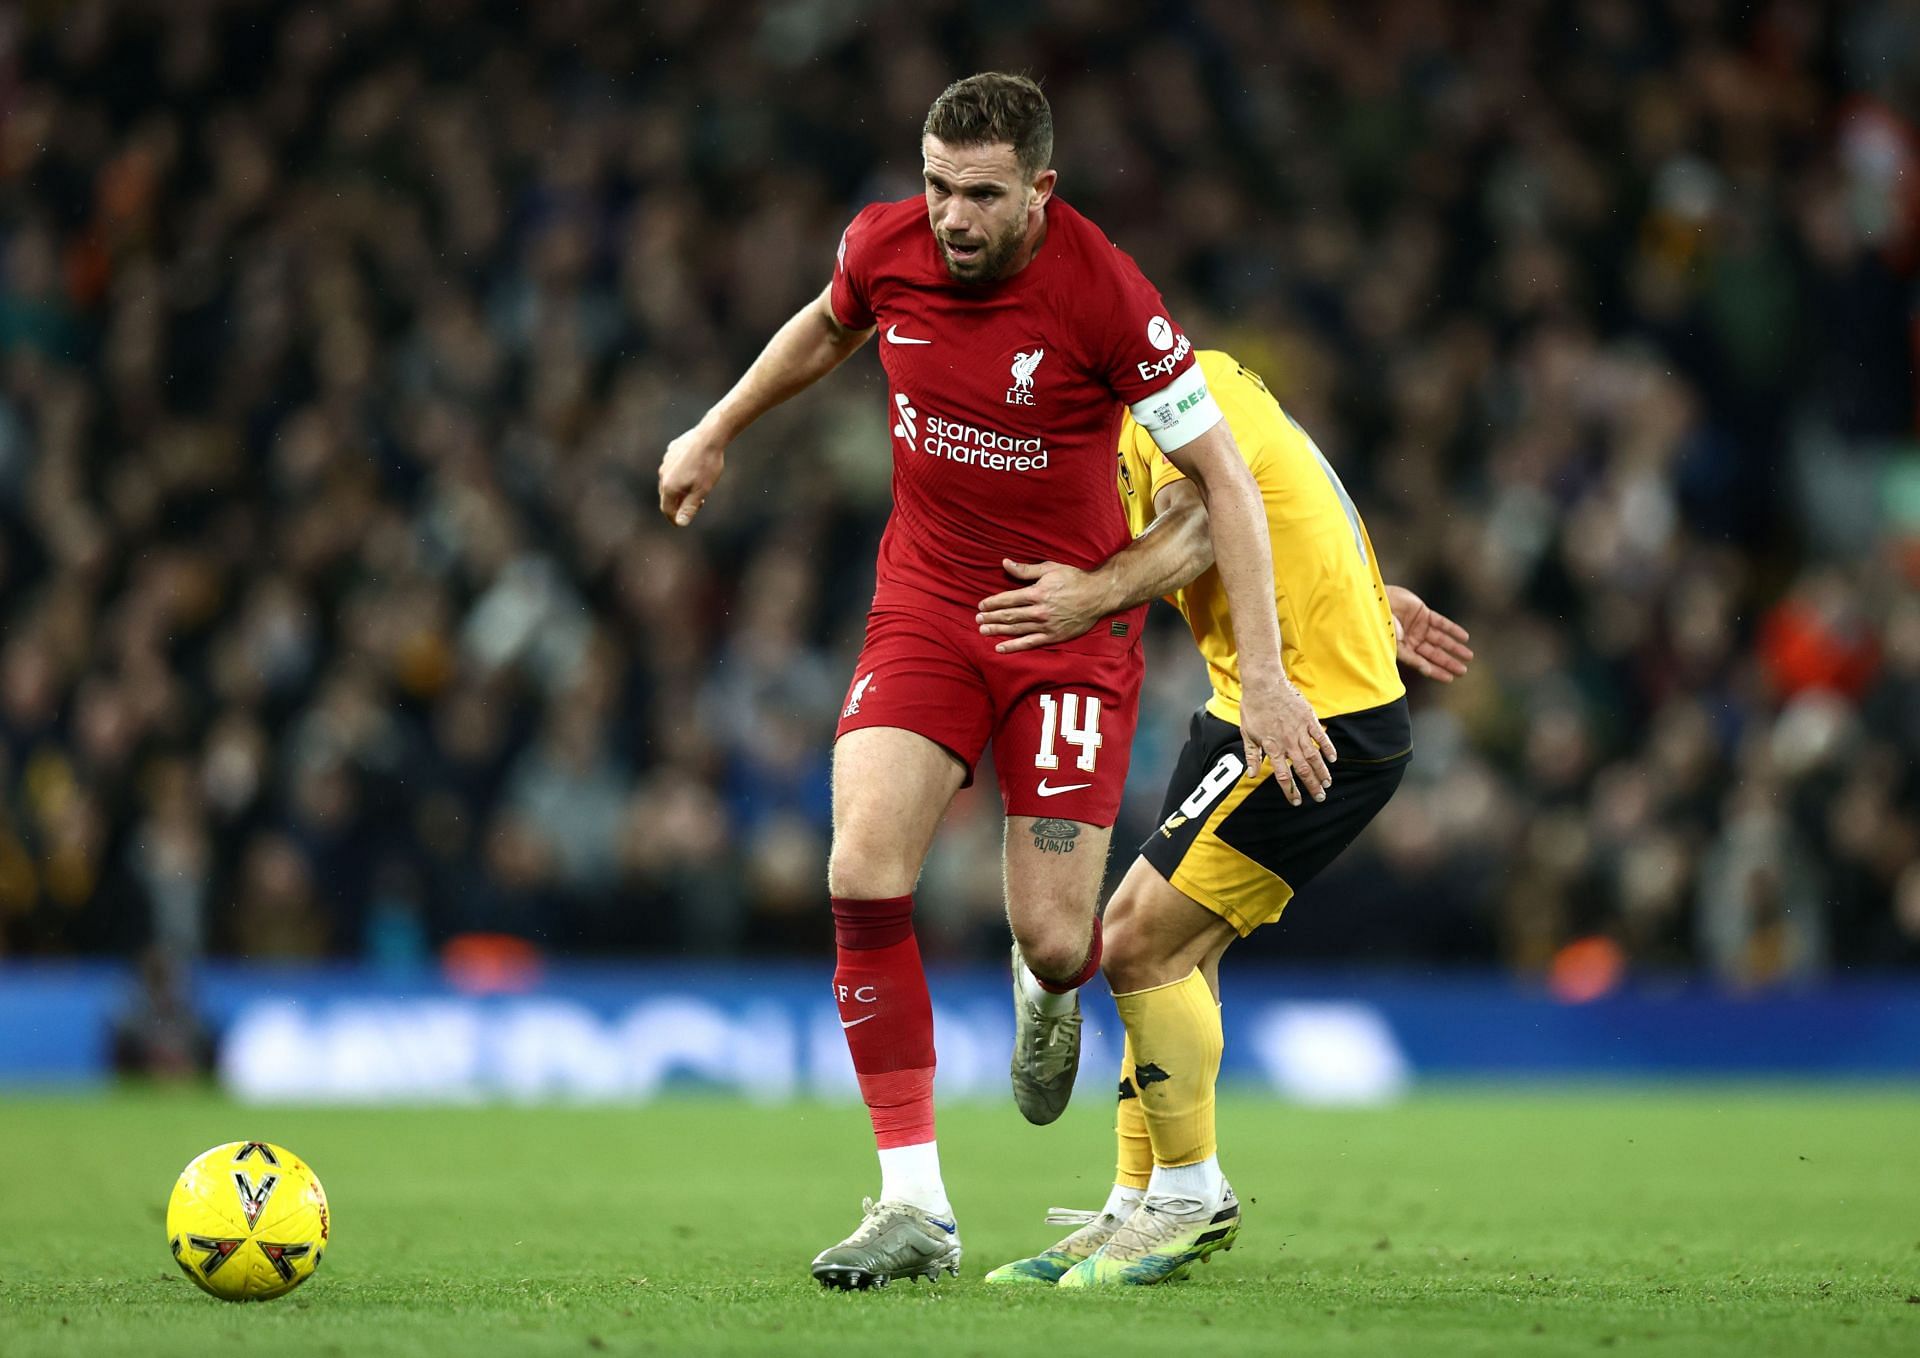 Jordan Henderson in action against Wolverhampton Wanderers: Emirates FA Cup Third Round